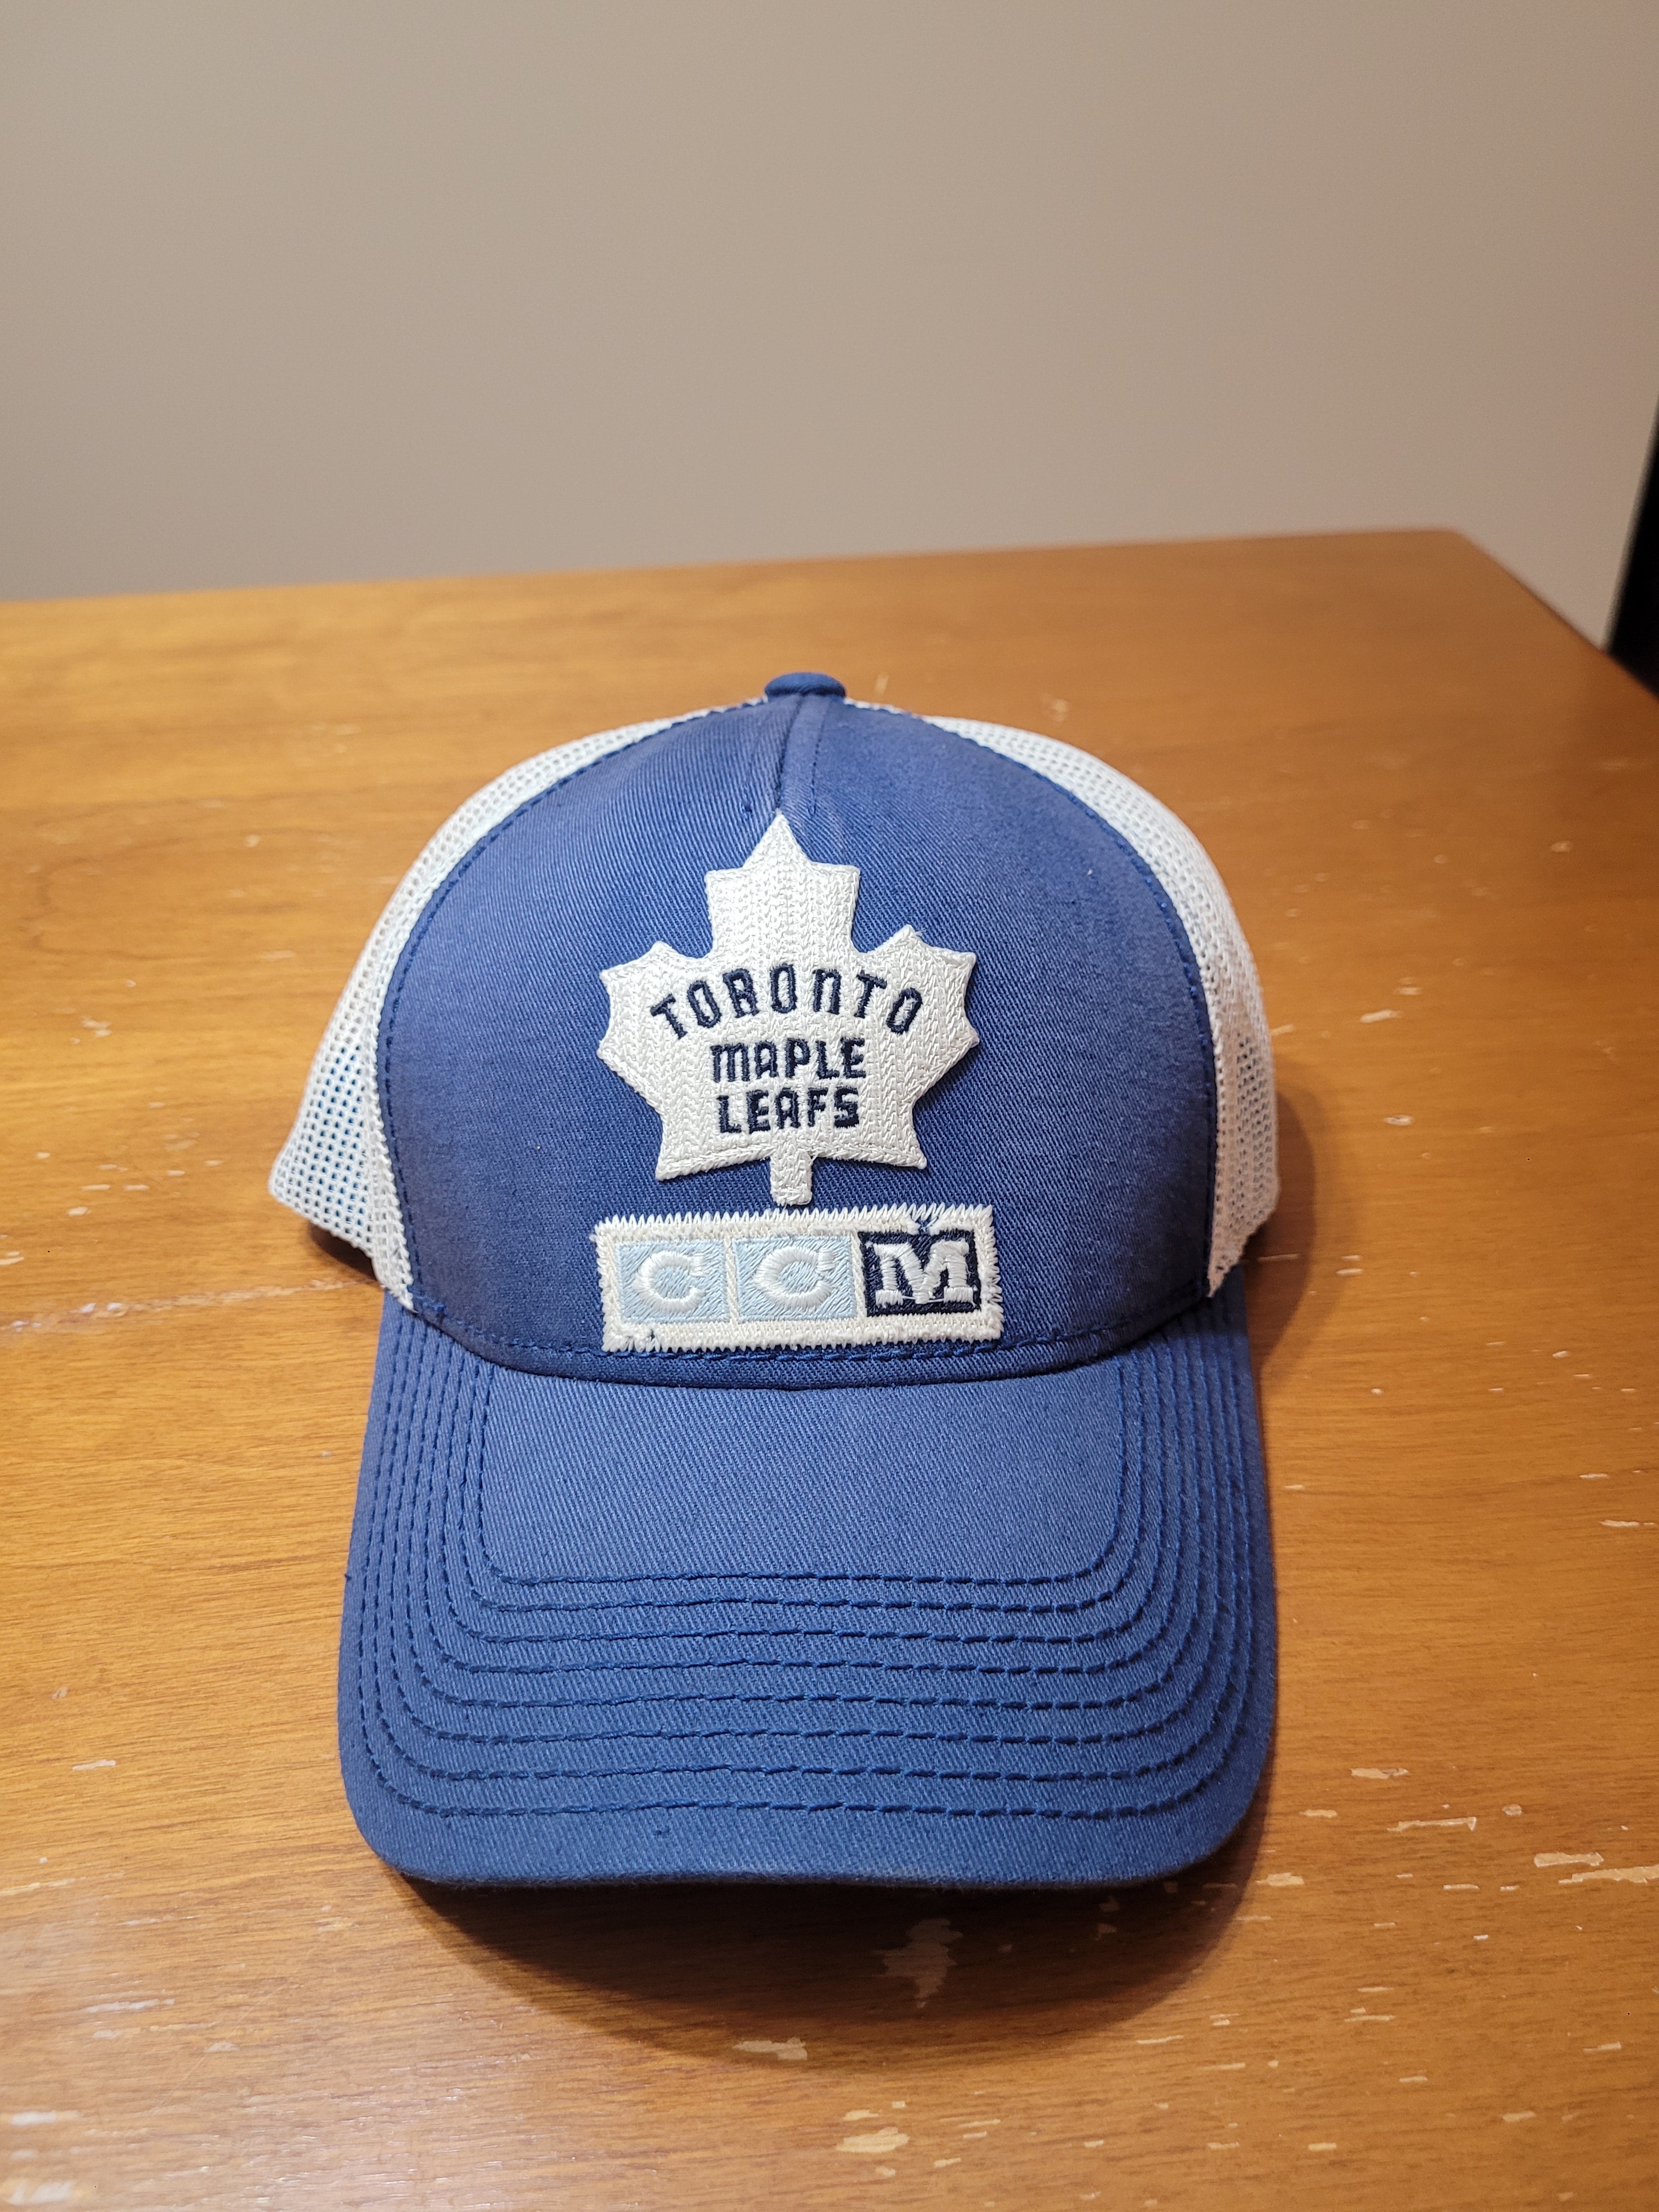 Vintage Toronto Maple Leafs Annco CCM Fitted Hockey Hat, Size 7 3